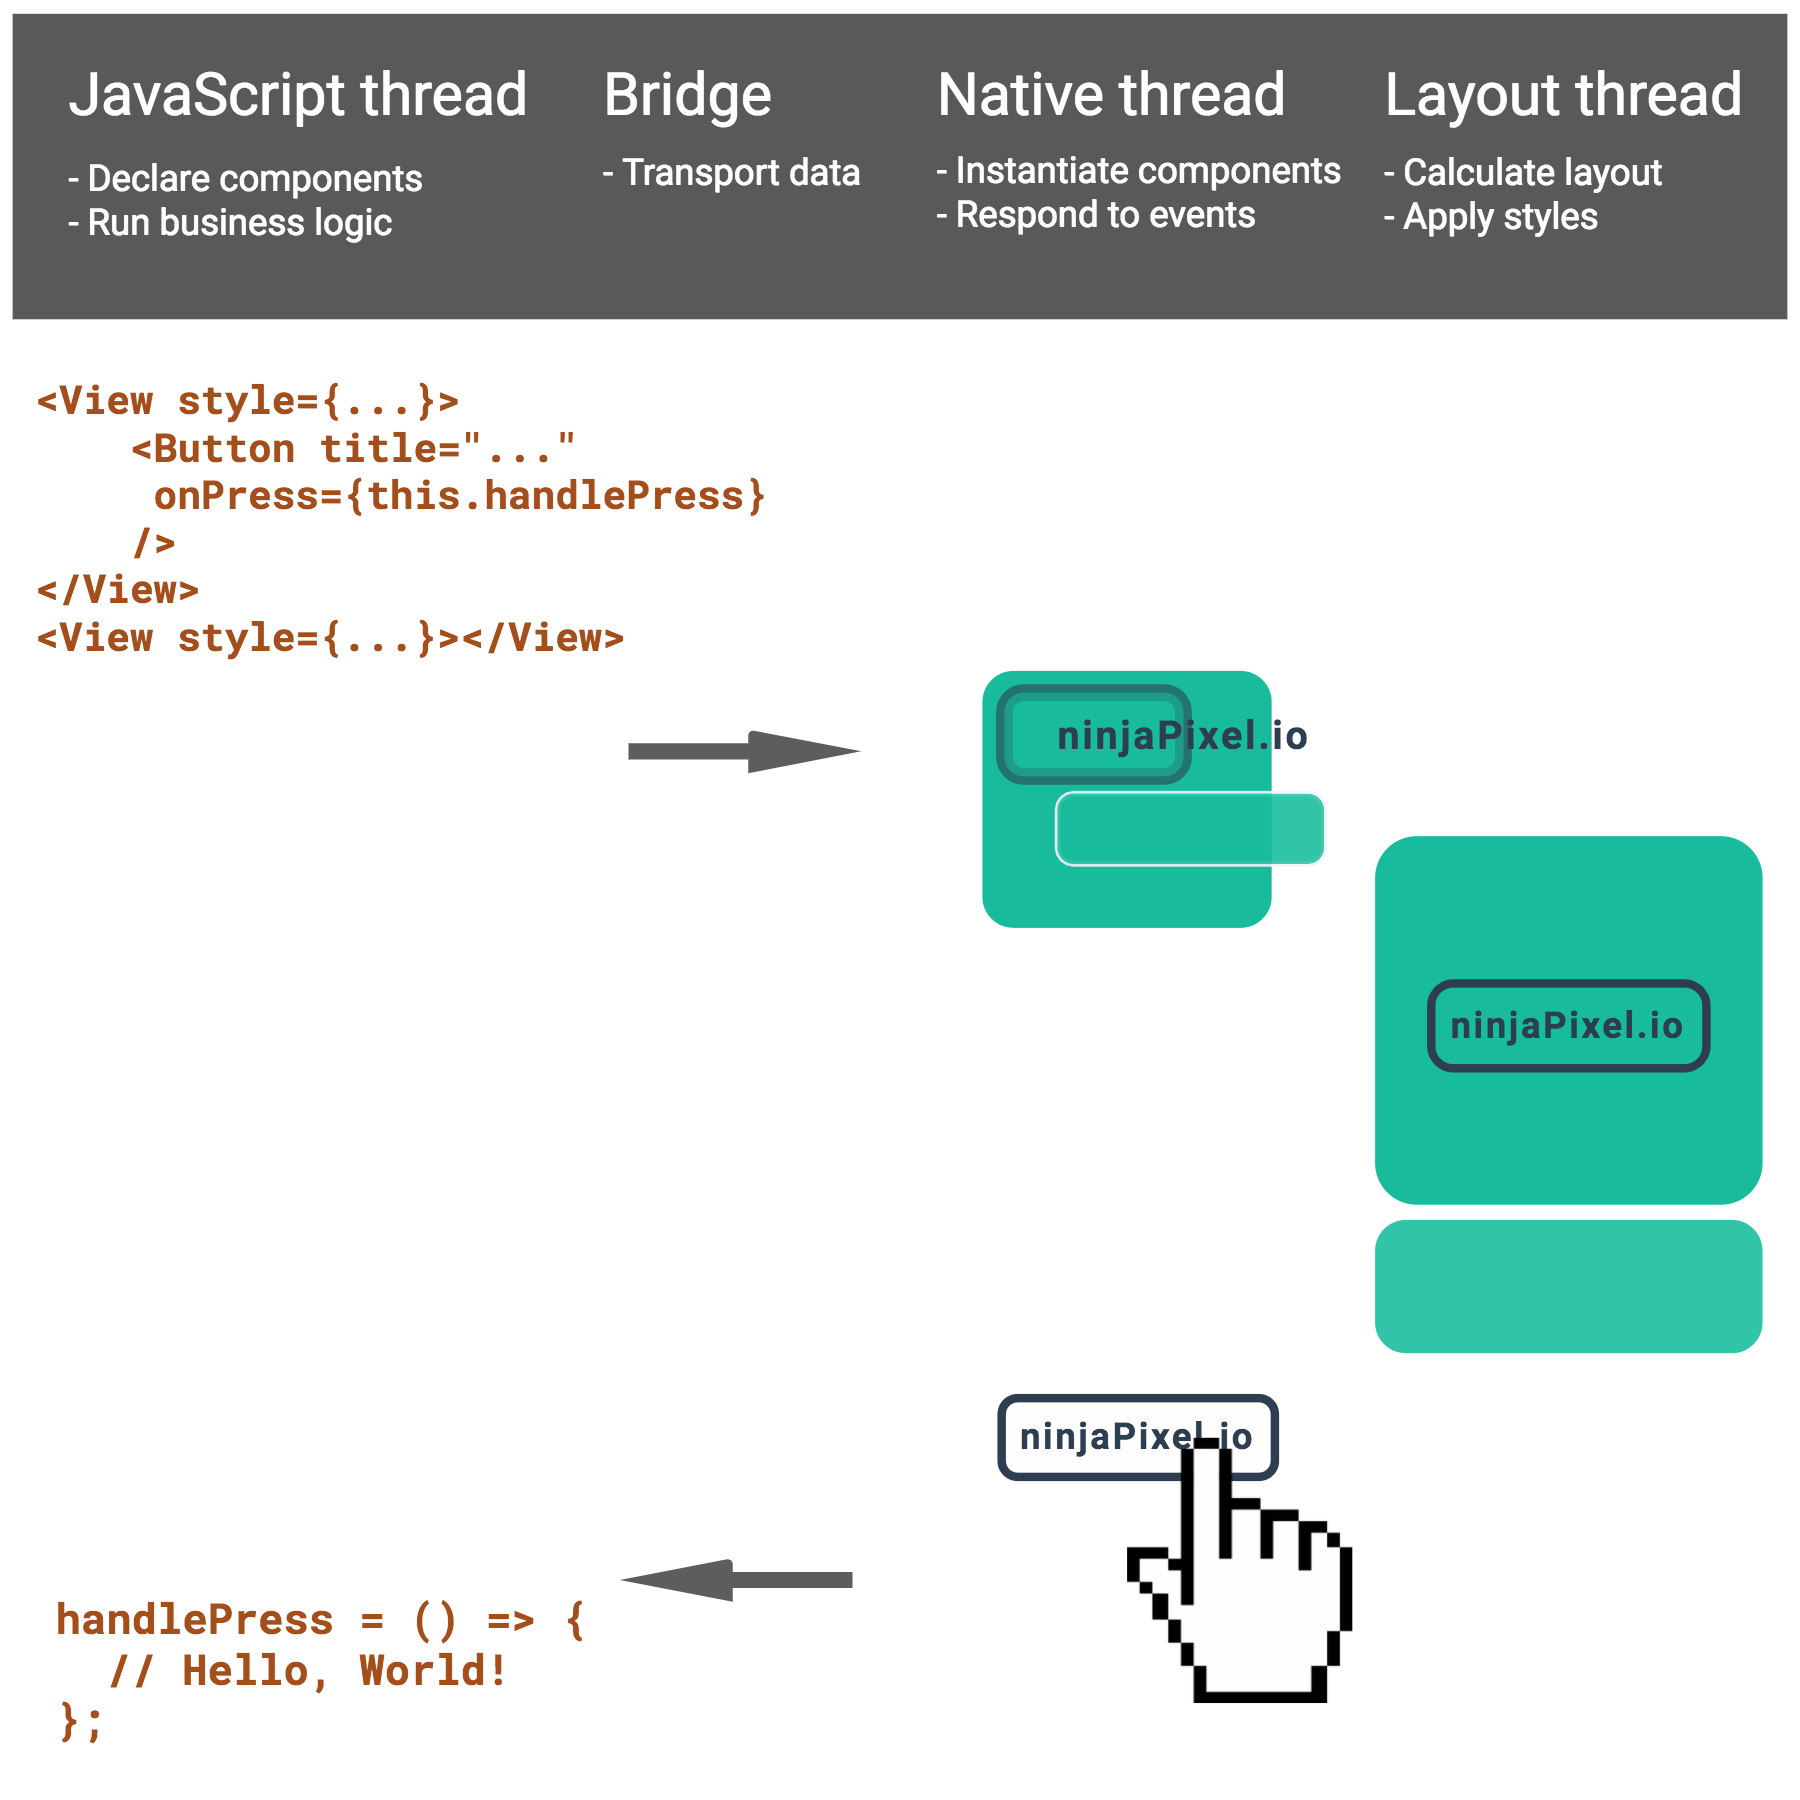 How the three react native threads work with the bridge